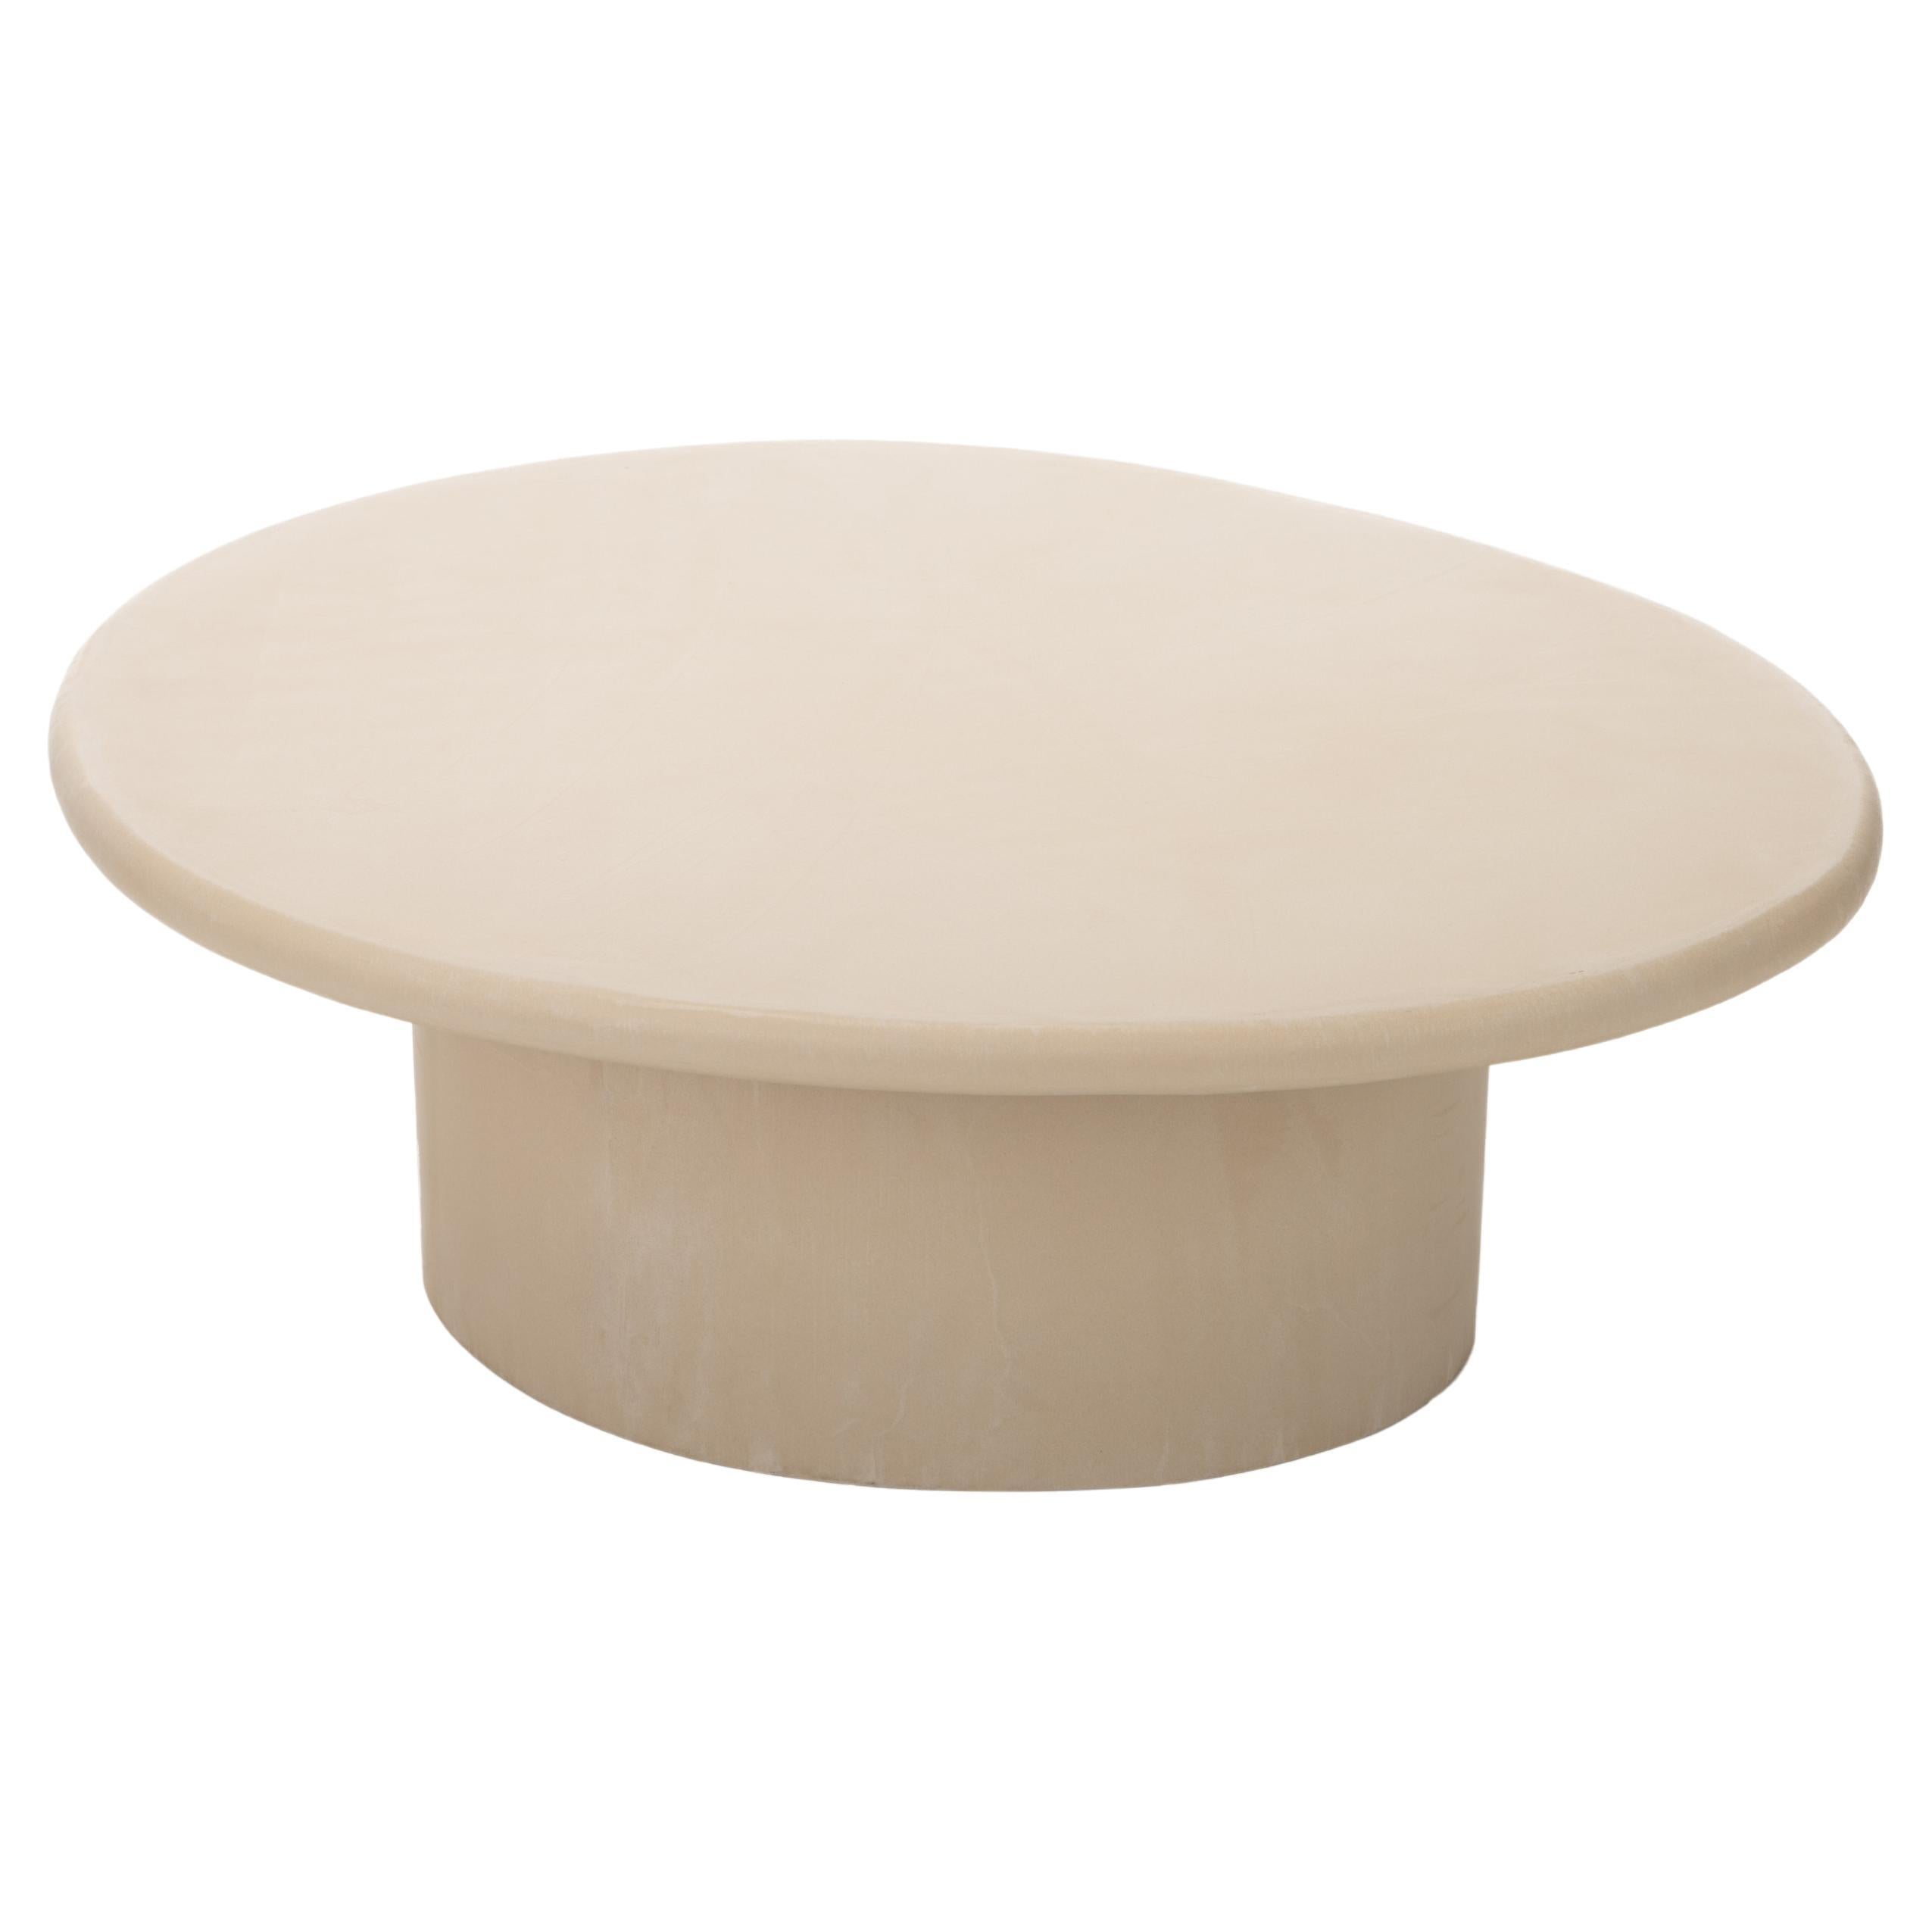 Organic Shaped Mortex Coffee Table "Sami 03" BM32 by Isabelle Beaumont